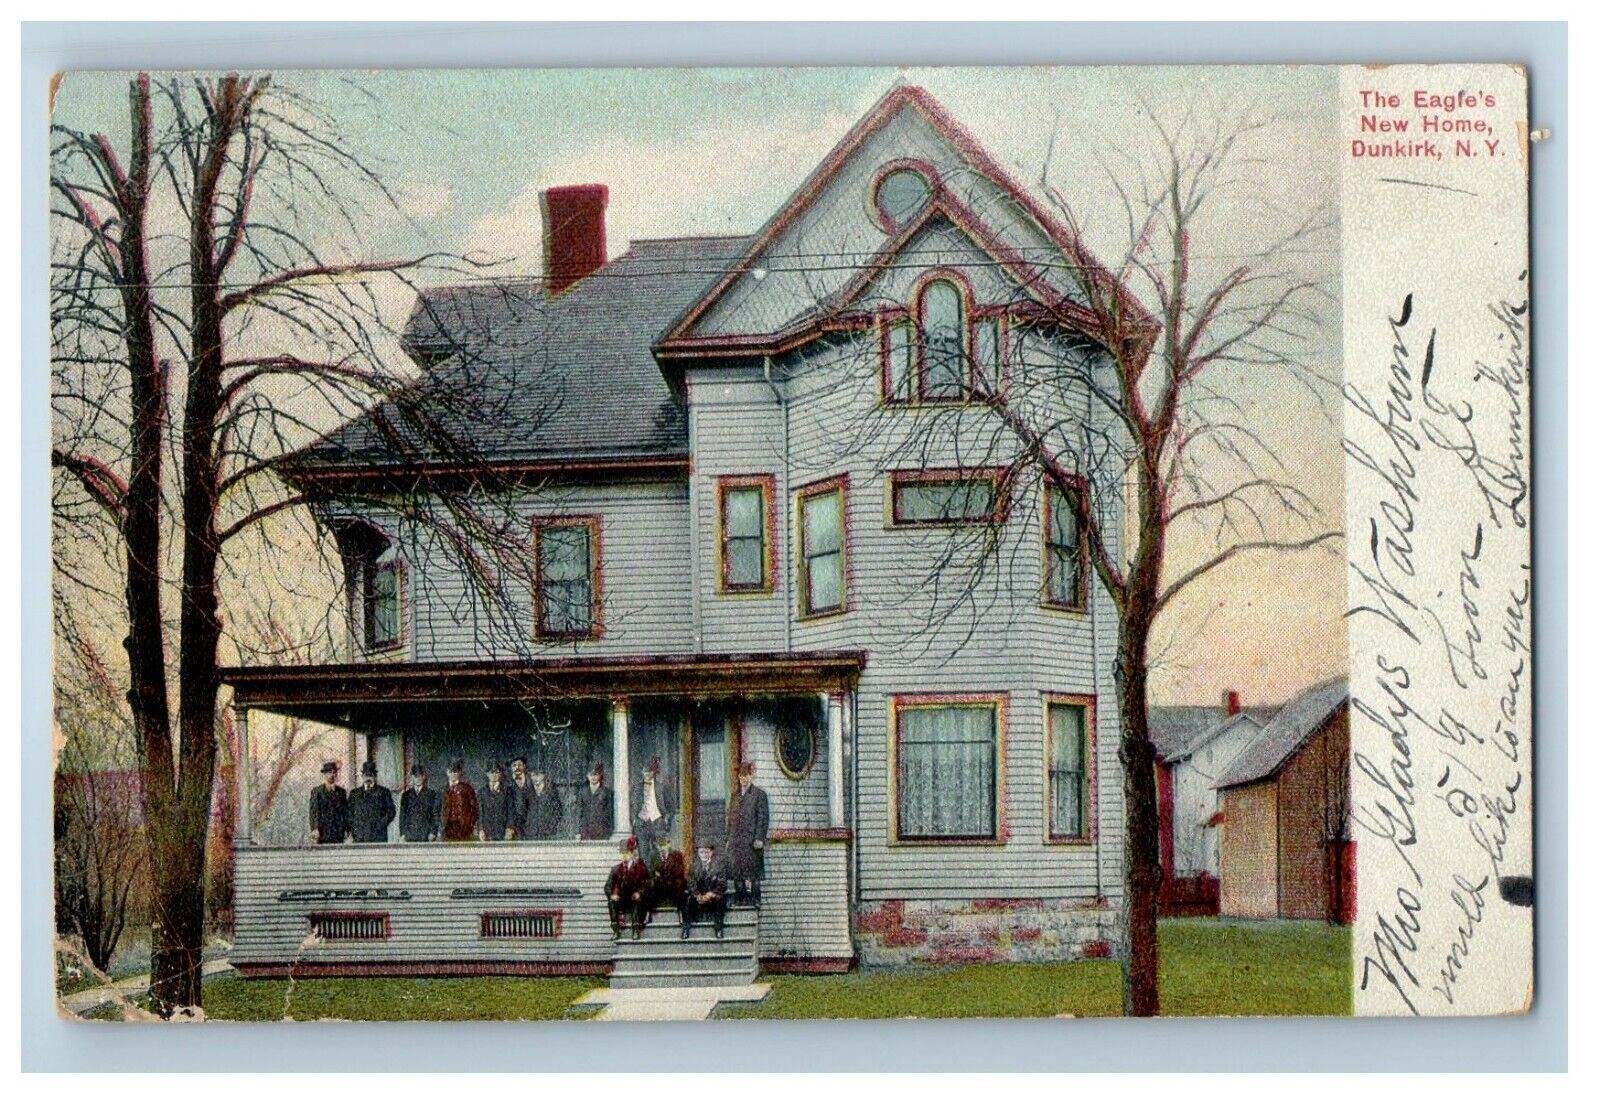 1909 View Of The Eagle's New Home Dunkirk New York NY Posted Antique Postcard